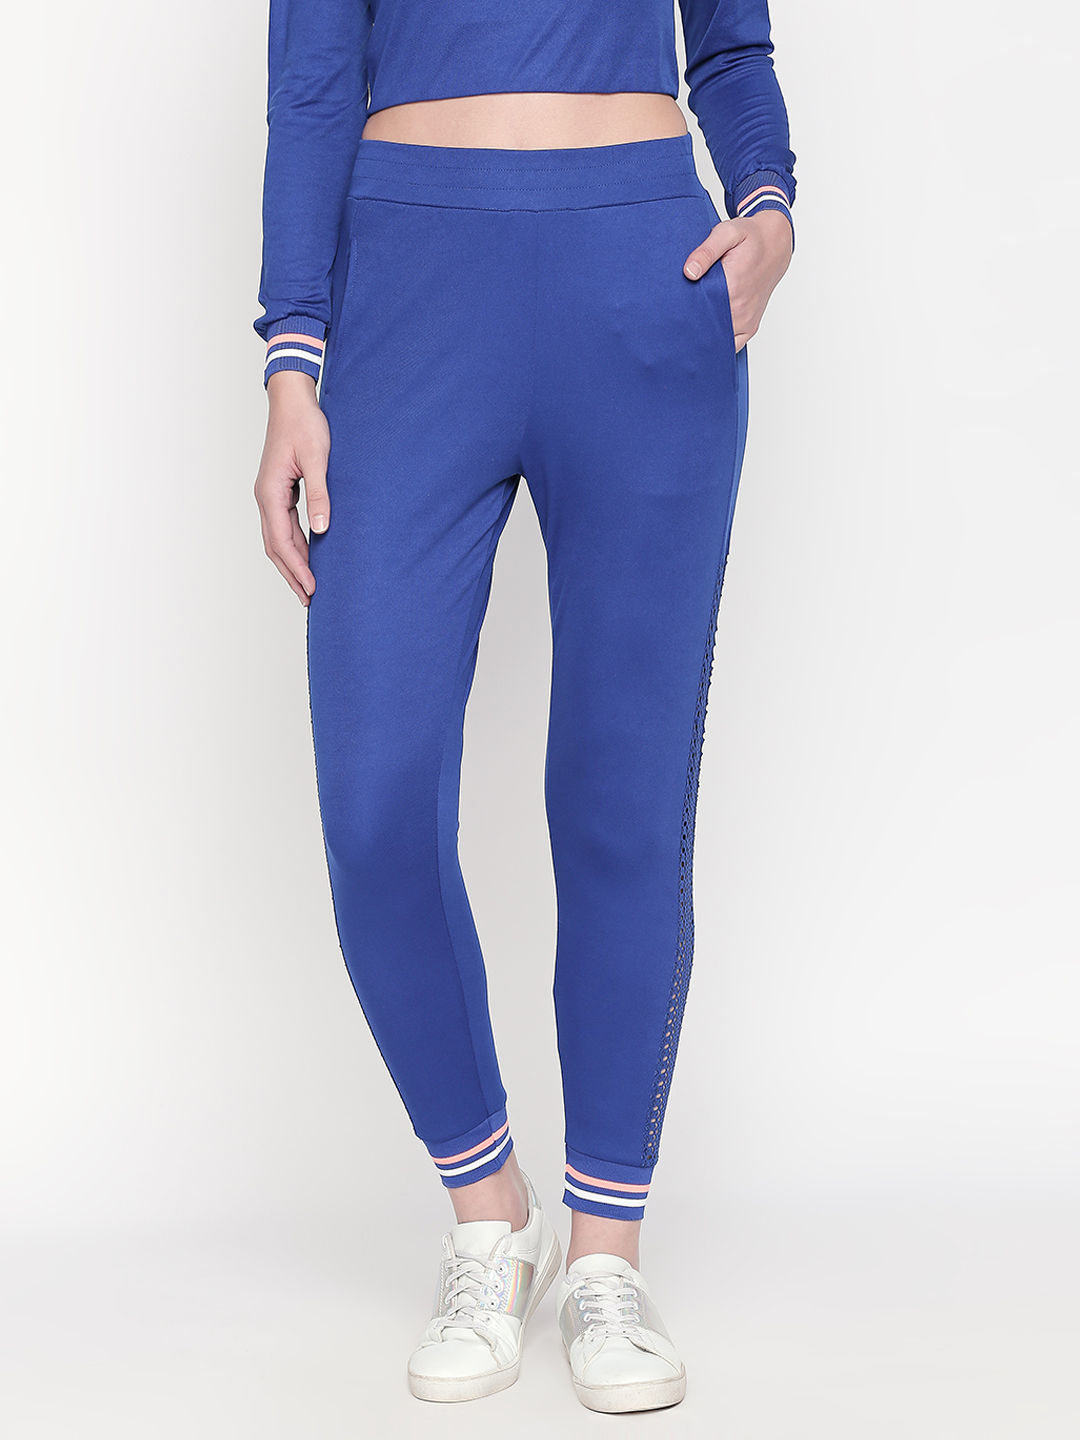 Buy Tuna London Active Wear Royal Blue Regular Fit Trackpants For Women'S  (XL) Online